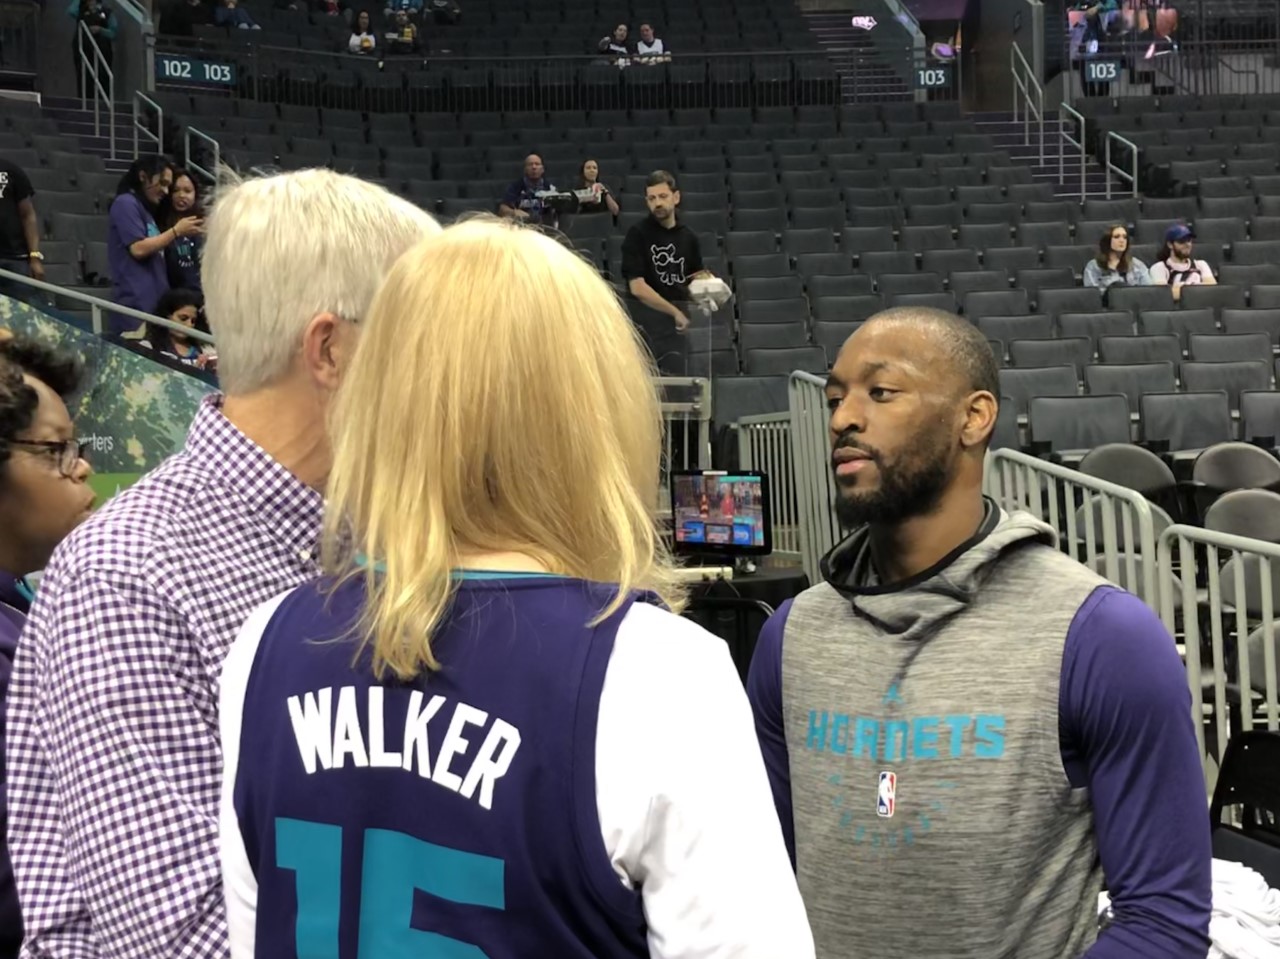 Charlotte Hornets - Congratulations on yesterday's win, Carolina Panthers!  Photos of Kemba Walker at the game as the #KeepPounding drummer:  on.nba.com/2eTPrv2